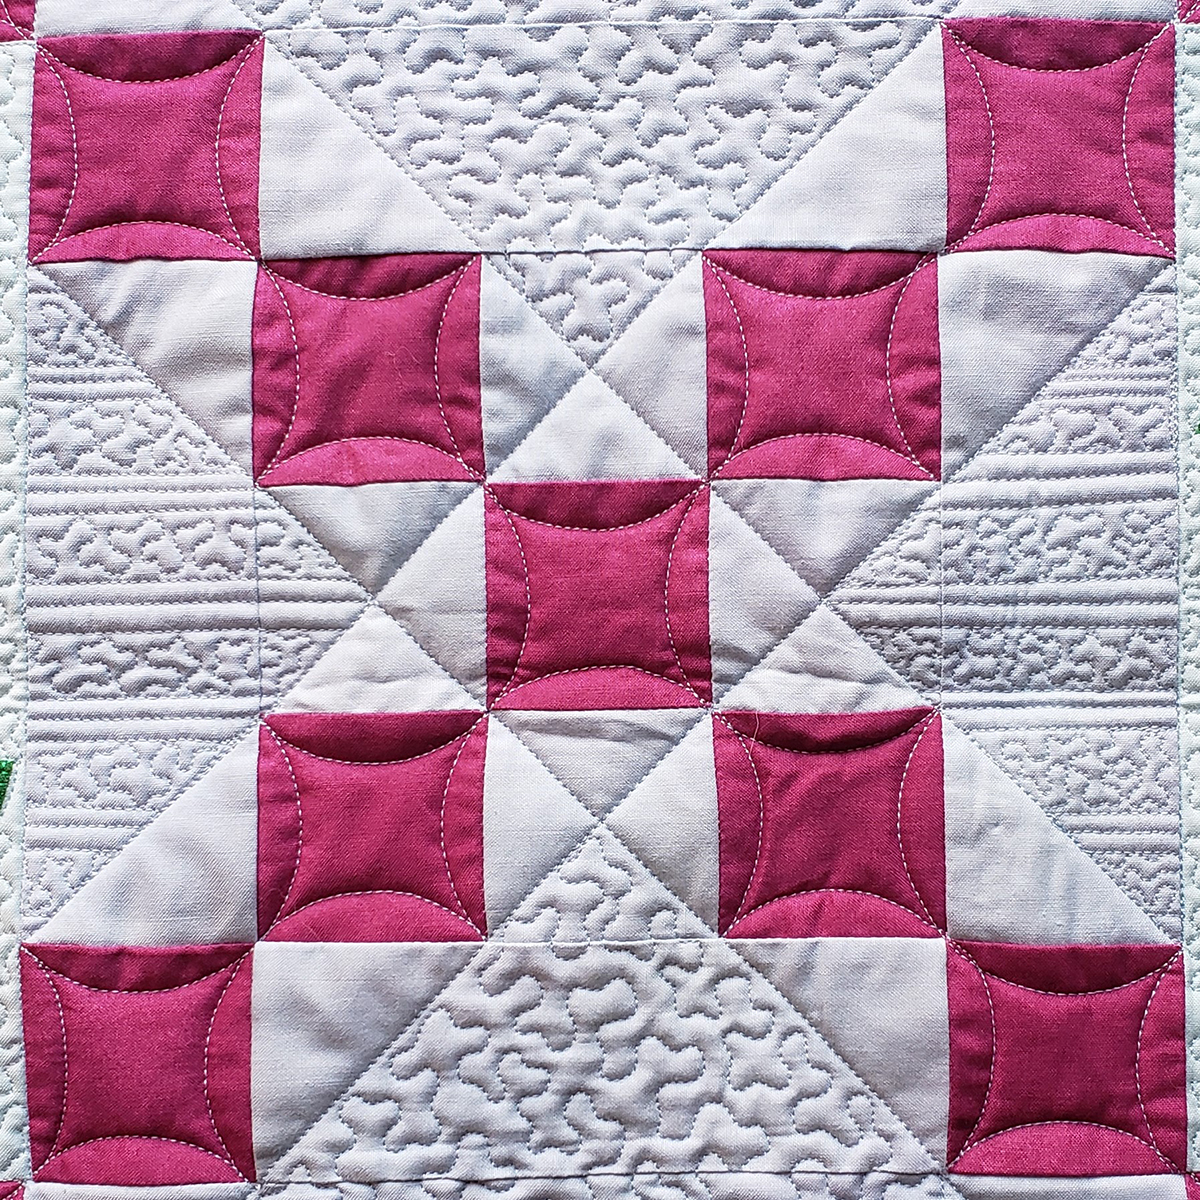 Beginners' Must Have Quilting Supplies - Cotton and Joy